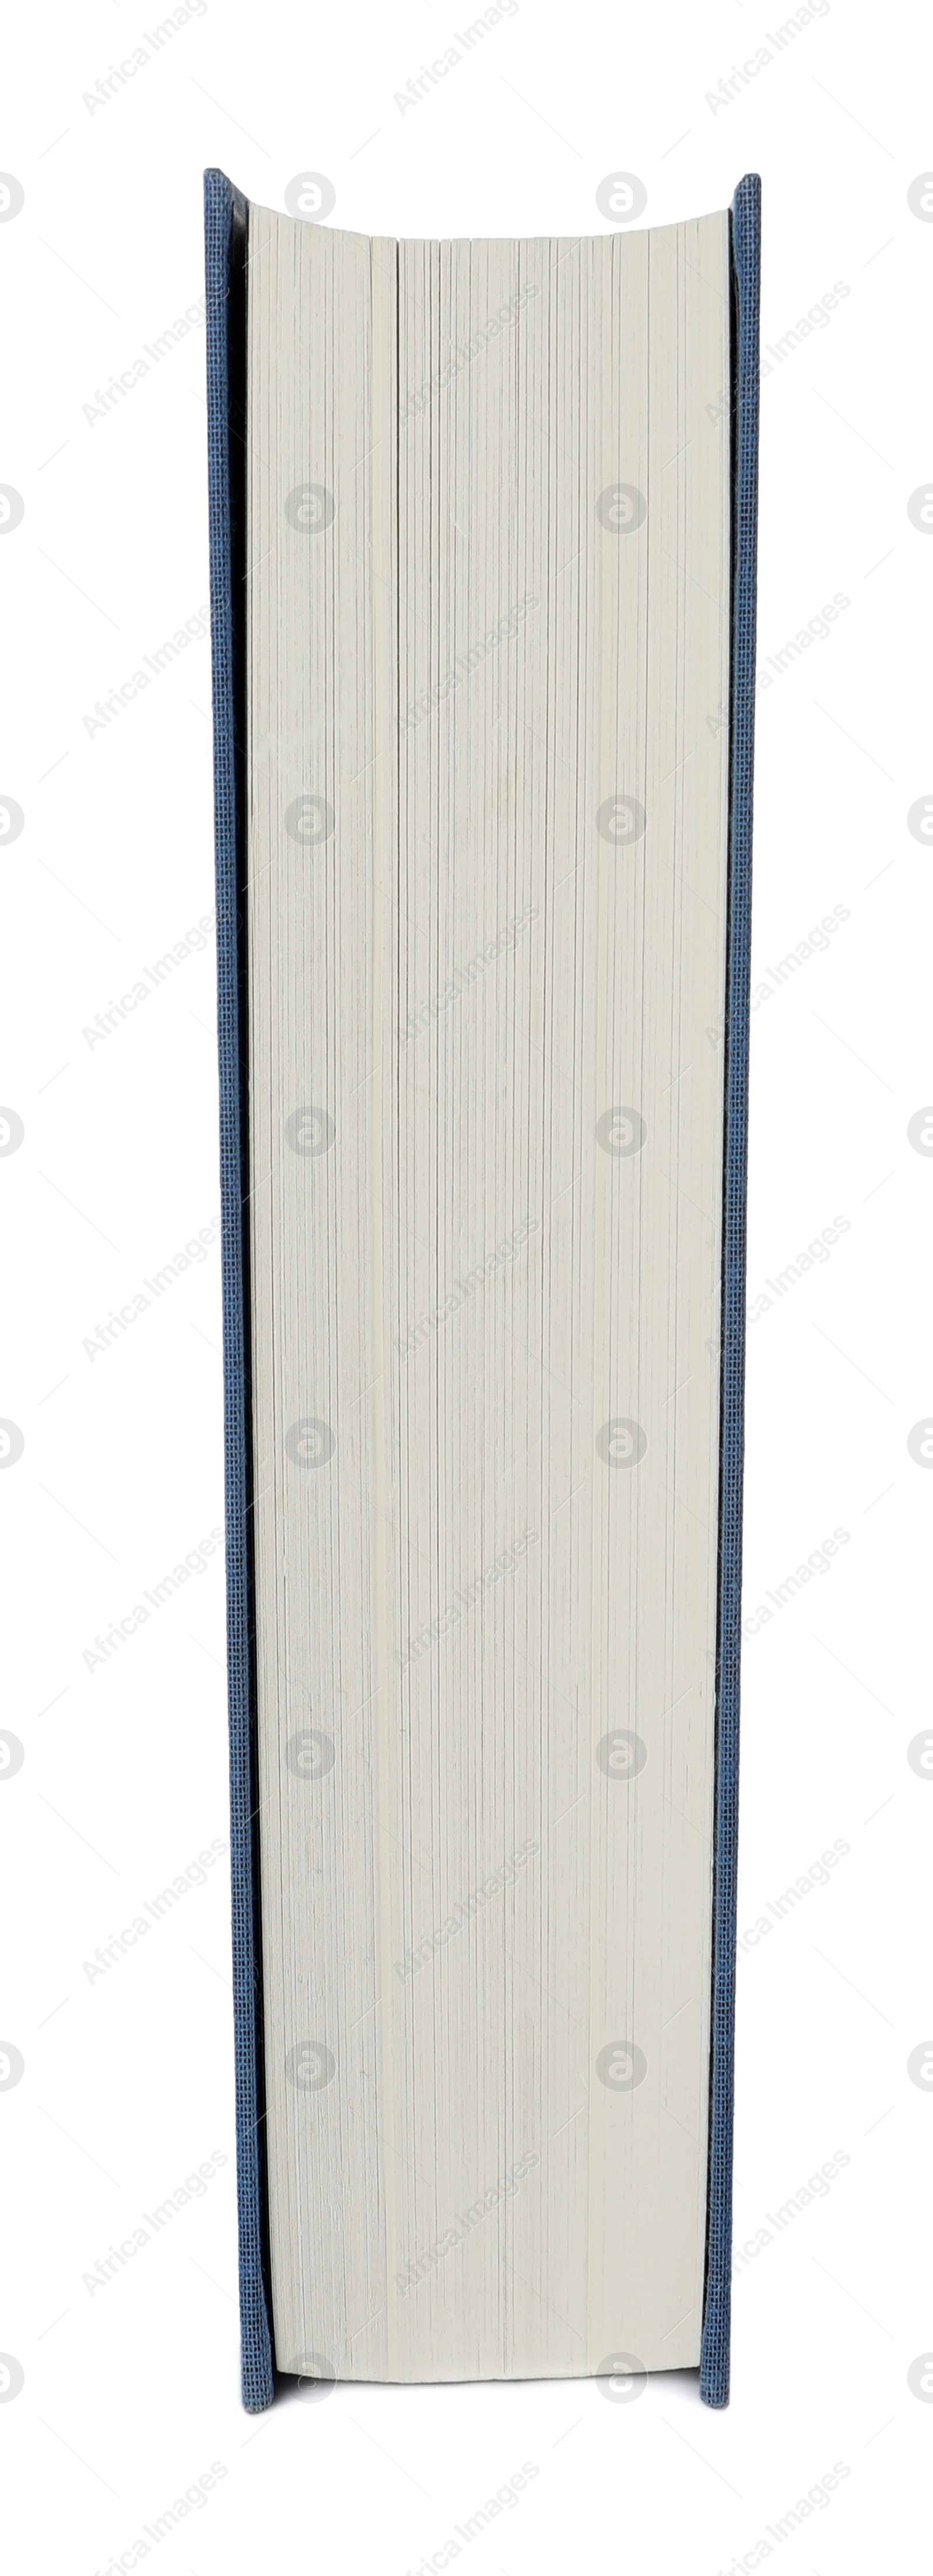 Photo of Closed book with brown hard cover isolated on white